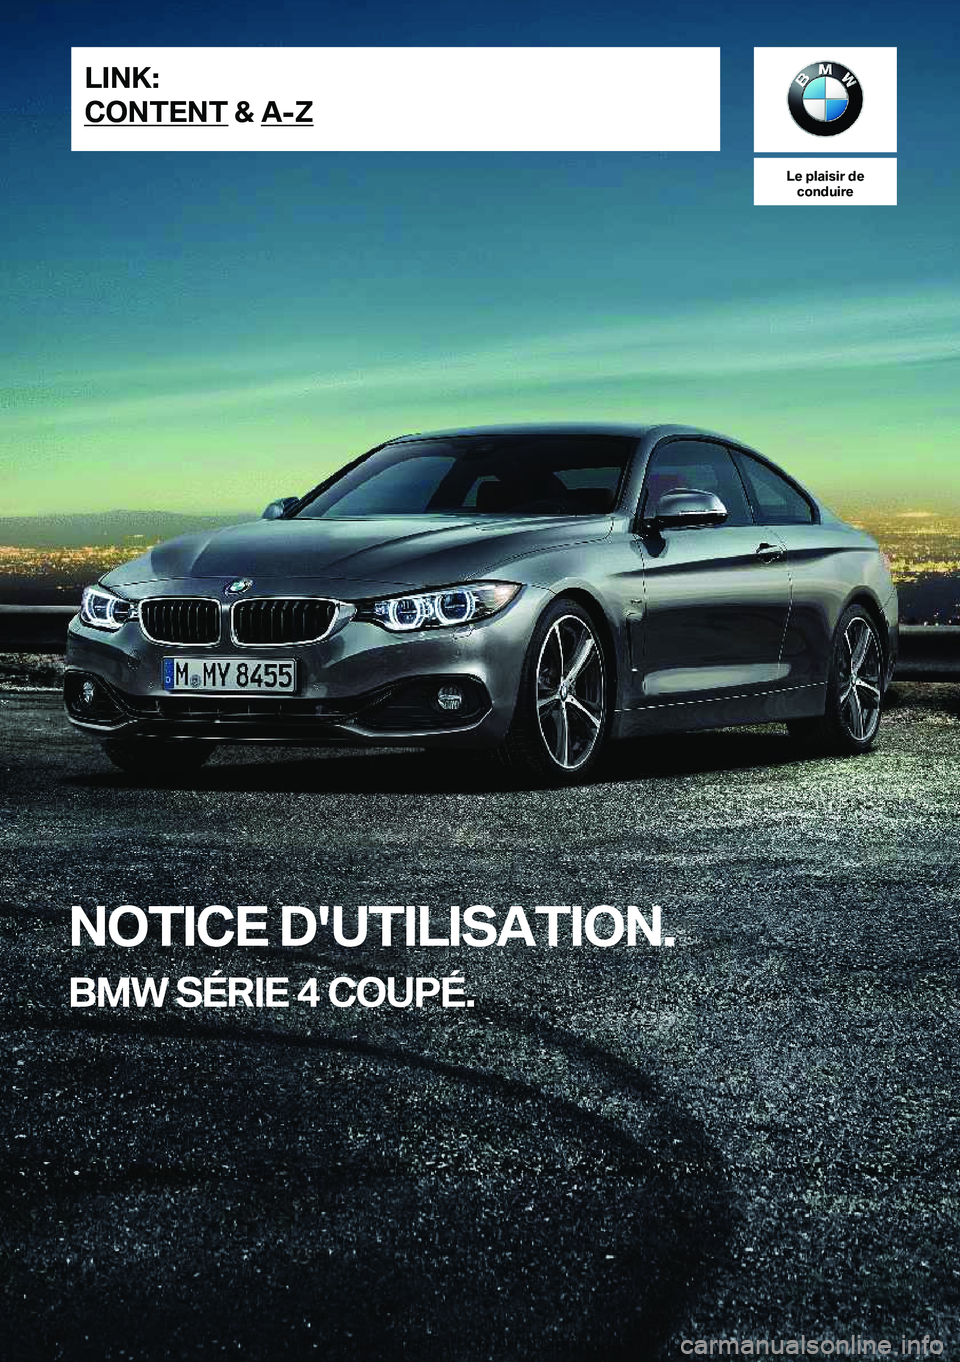 BMW 4 SERIES COUPE 2020  Notices Demploi (in French) �L�e��p�l�a�i�s�i�r��d�e�c�o�n�d�u�i�r�e
�N�O�T�I�C�E��D�'�U�T�I�L�I�S�A�T�I�O�N�.
�B�M�W��S�É�R�I�E��4��C�O�U�P�É�.�L�I�N�K�:
�C�O�N�T�E�N�T��&��A�-�;�O�n�l�i�n�e��E�d�i�t�i�o�n��f�o�